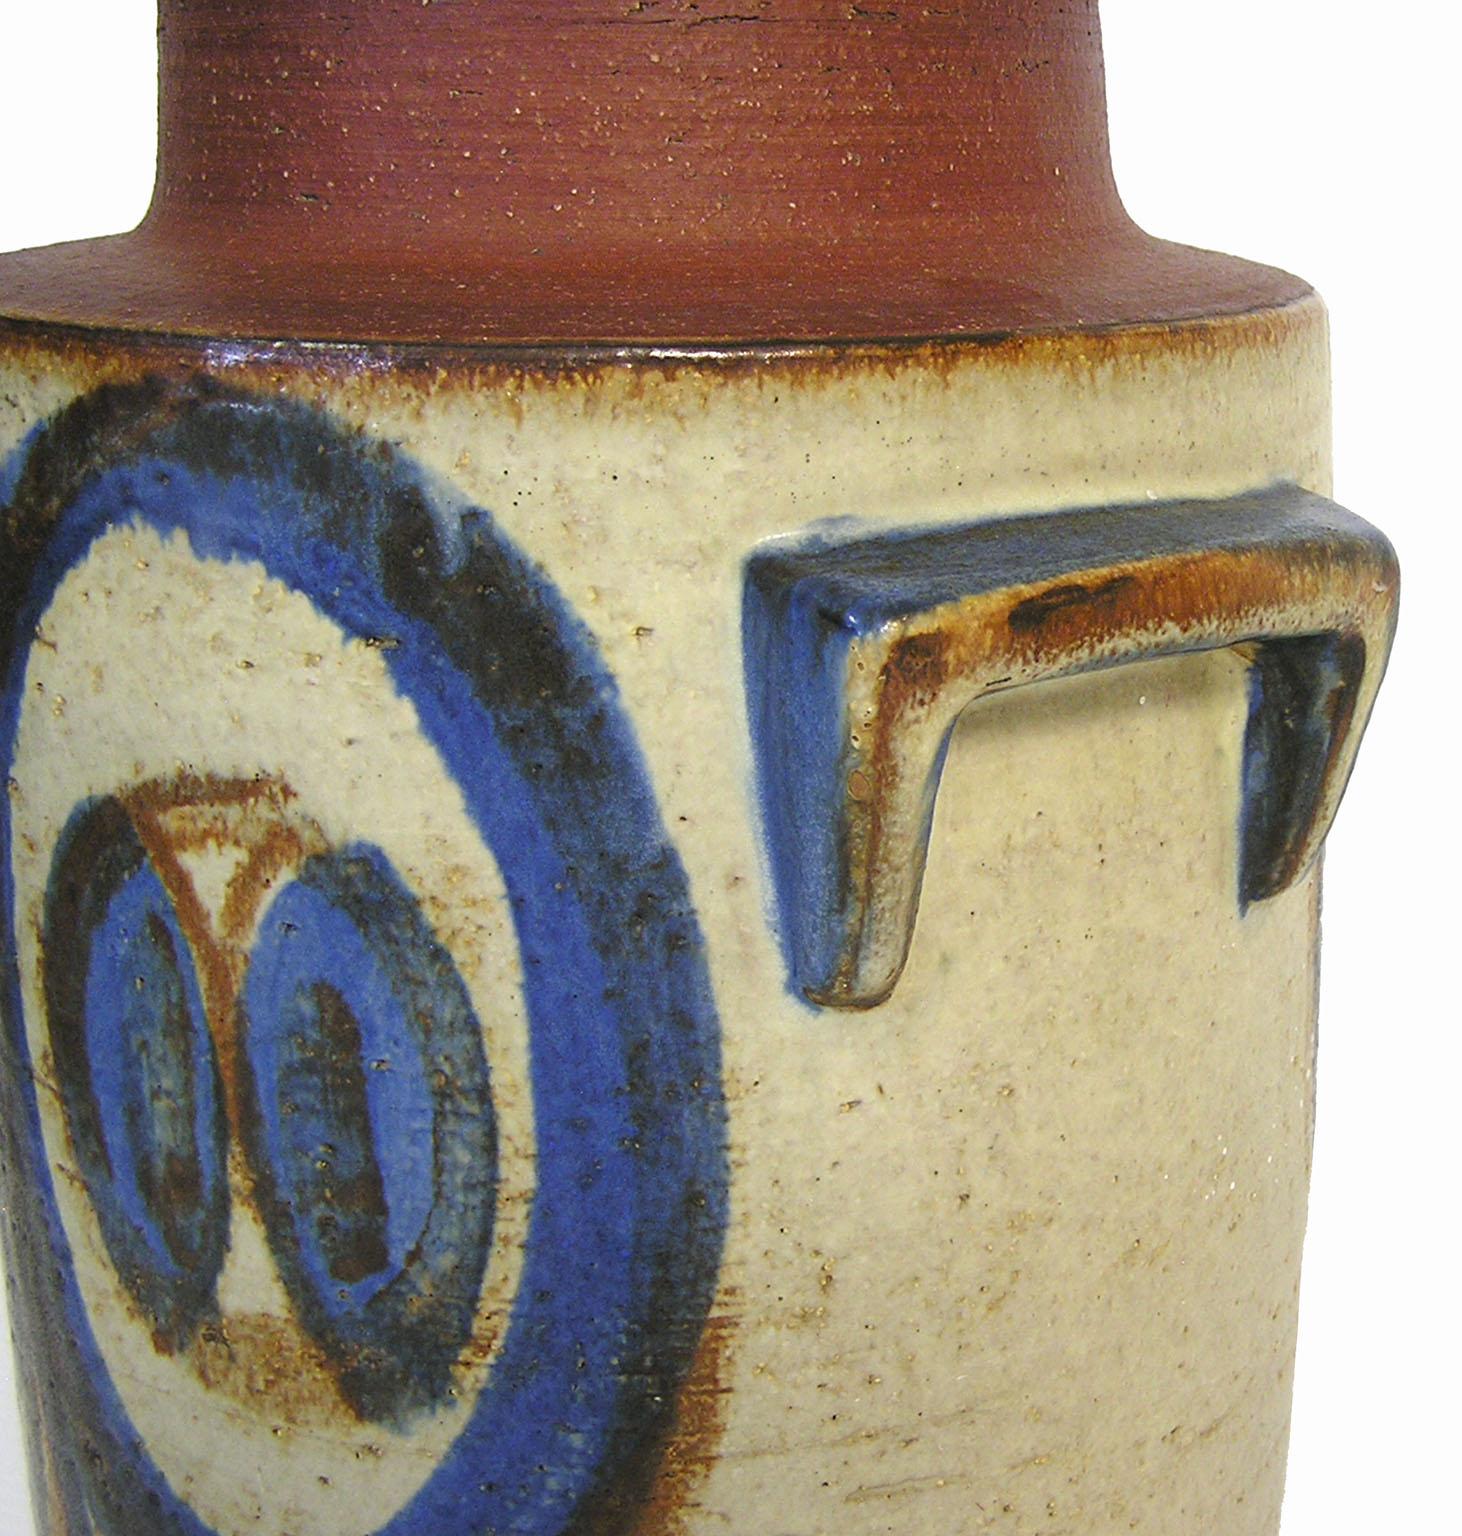 1960s Handled Soholm Pottery Planter Vase by Svend Aage Jensen, Denmark In Good Condition For Sale In Winnipeg, Manitoba